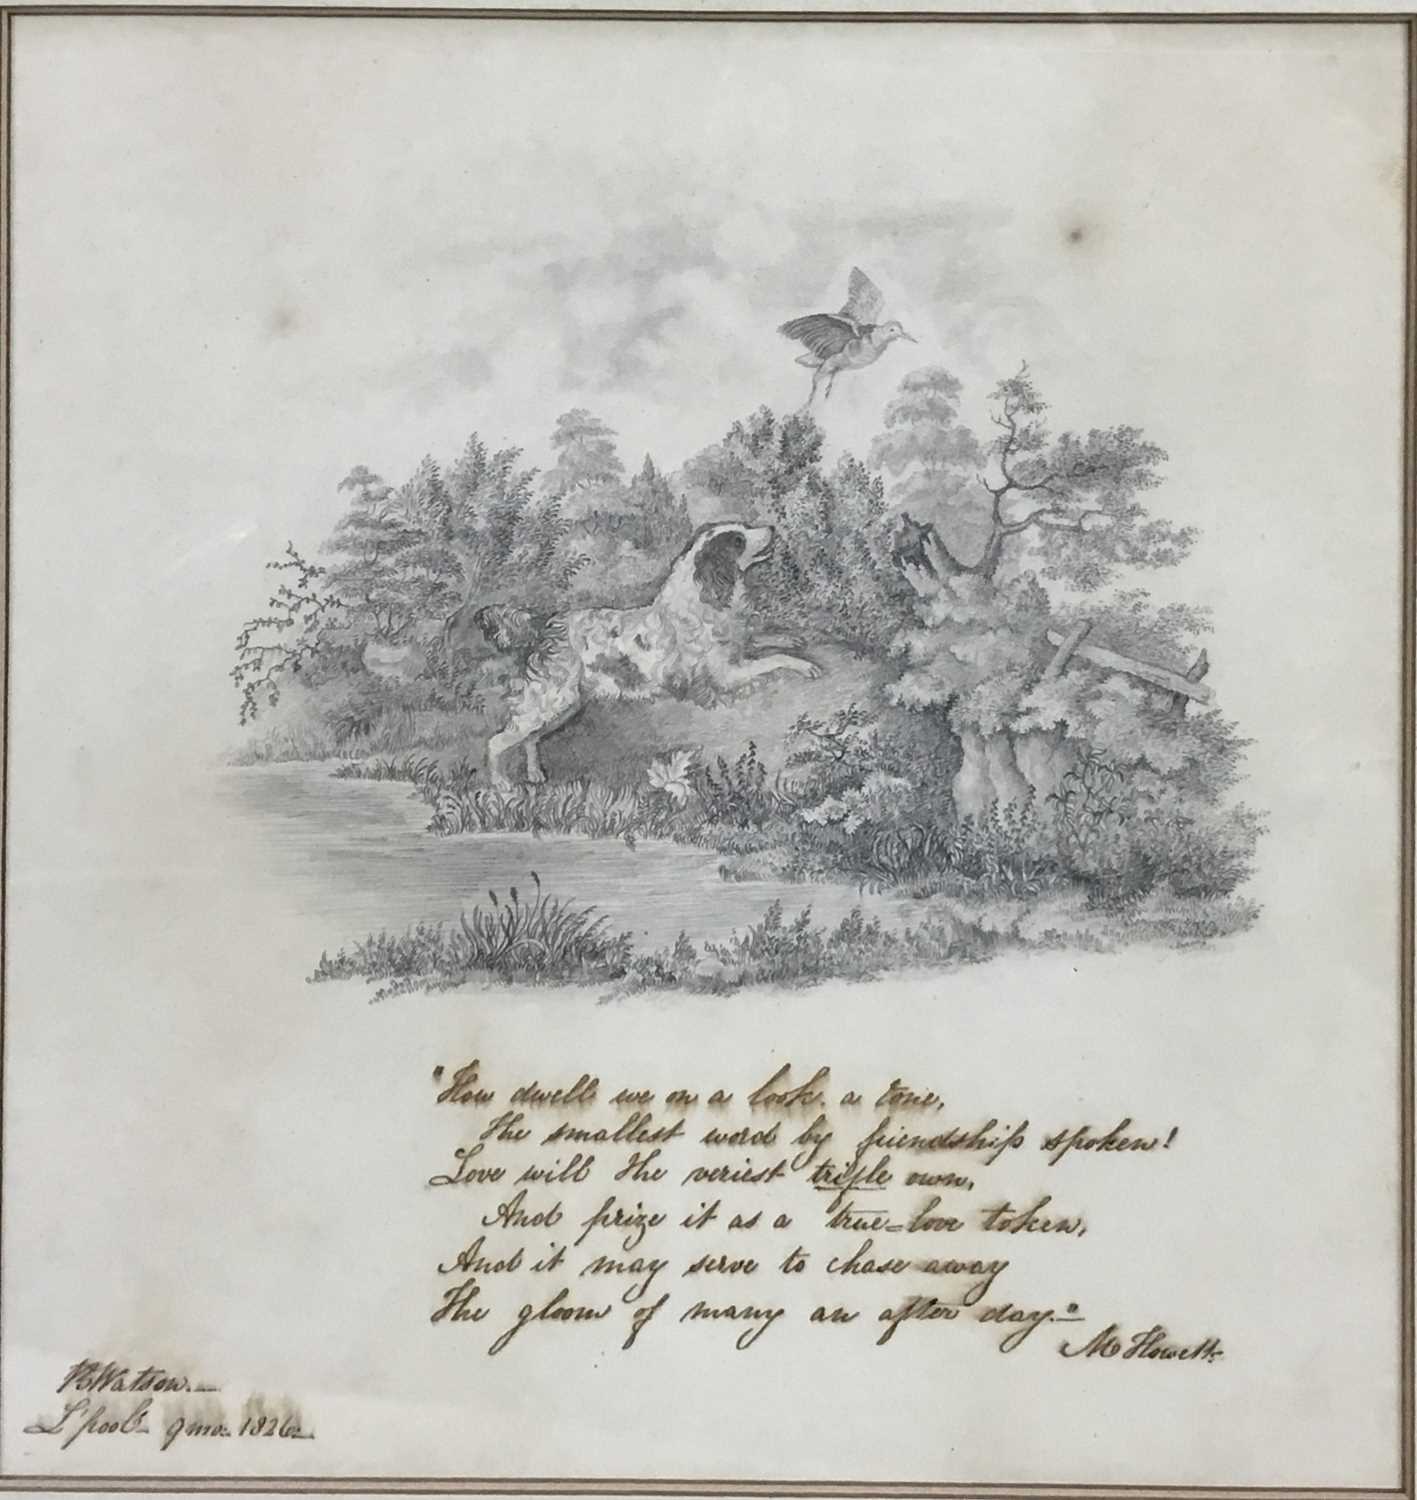 Lot 34 - English School 19th century pencil drawing inscribed with verse - spaniel gun dog chasing a plover, signed B. Watson 1826'